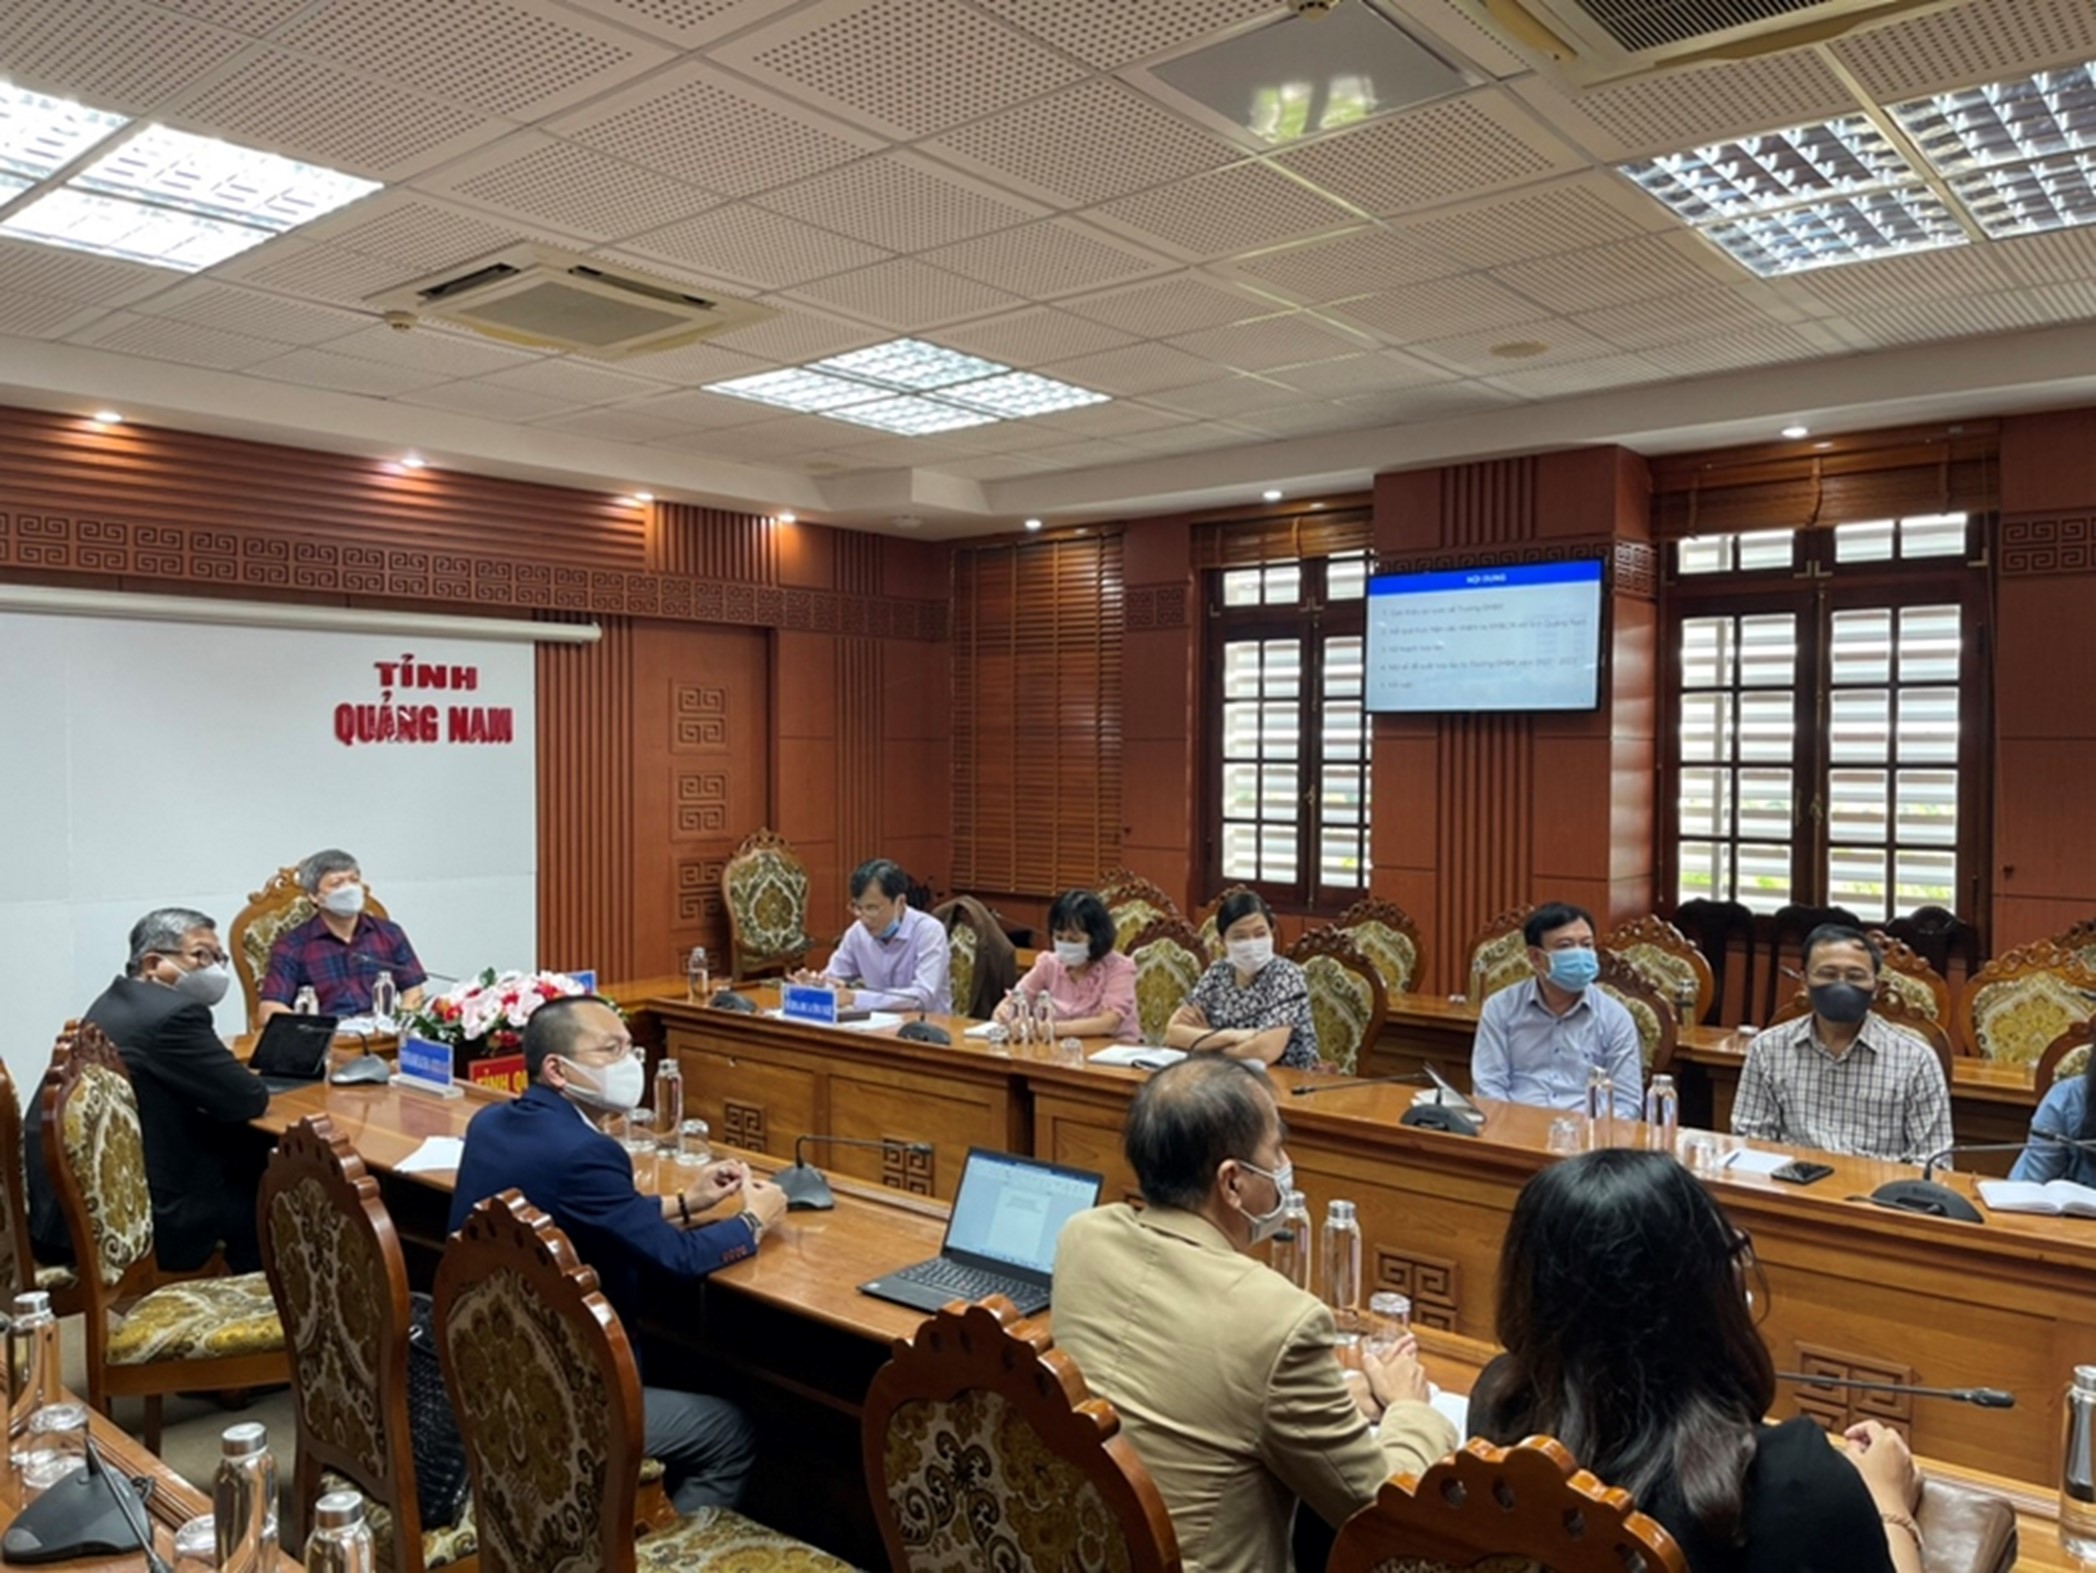 Quang Nam Province and University of Science and Technology, UD promote cooperation in the field of Science and Technology